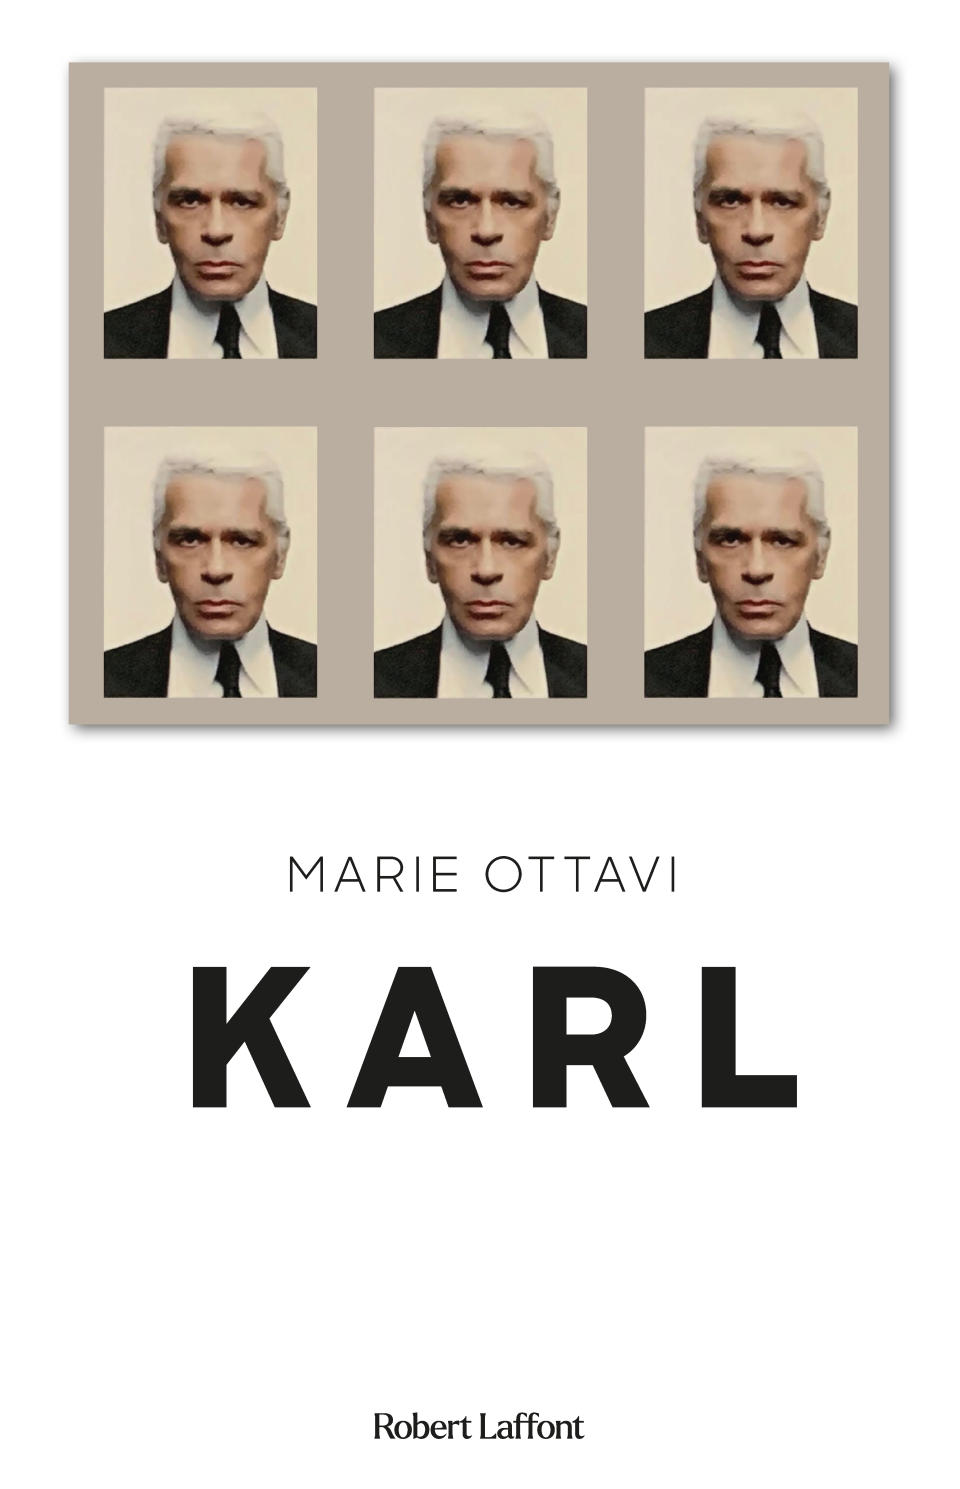 The cover pof Marie Ottavi’s book “Karl.” - Credit: Courtesy of Éditions Robert Laffont